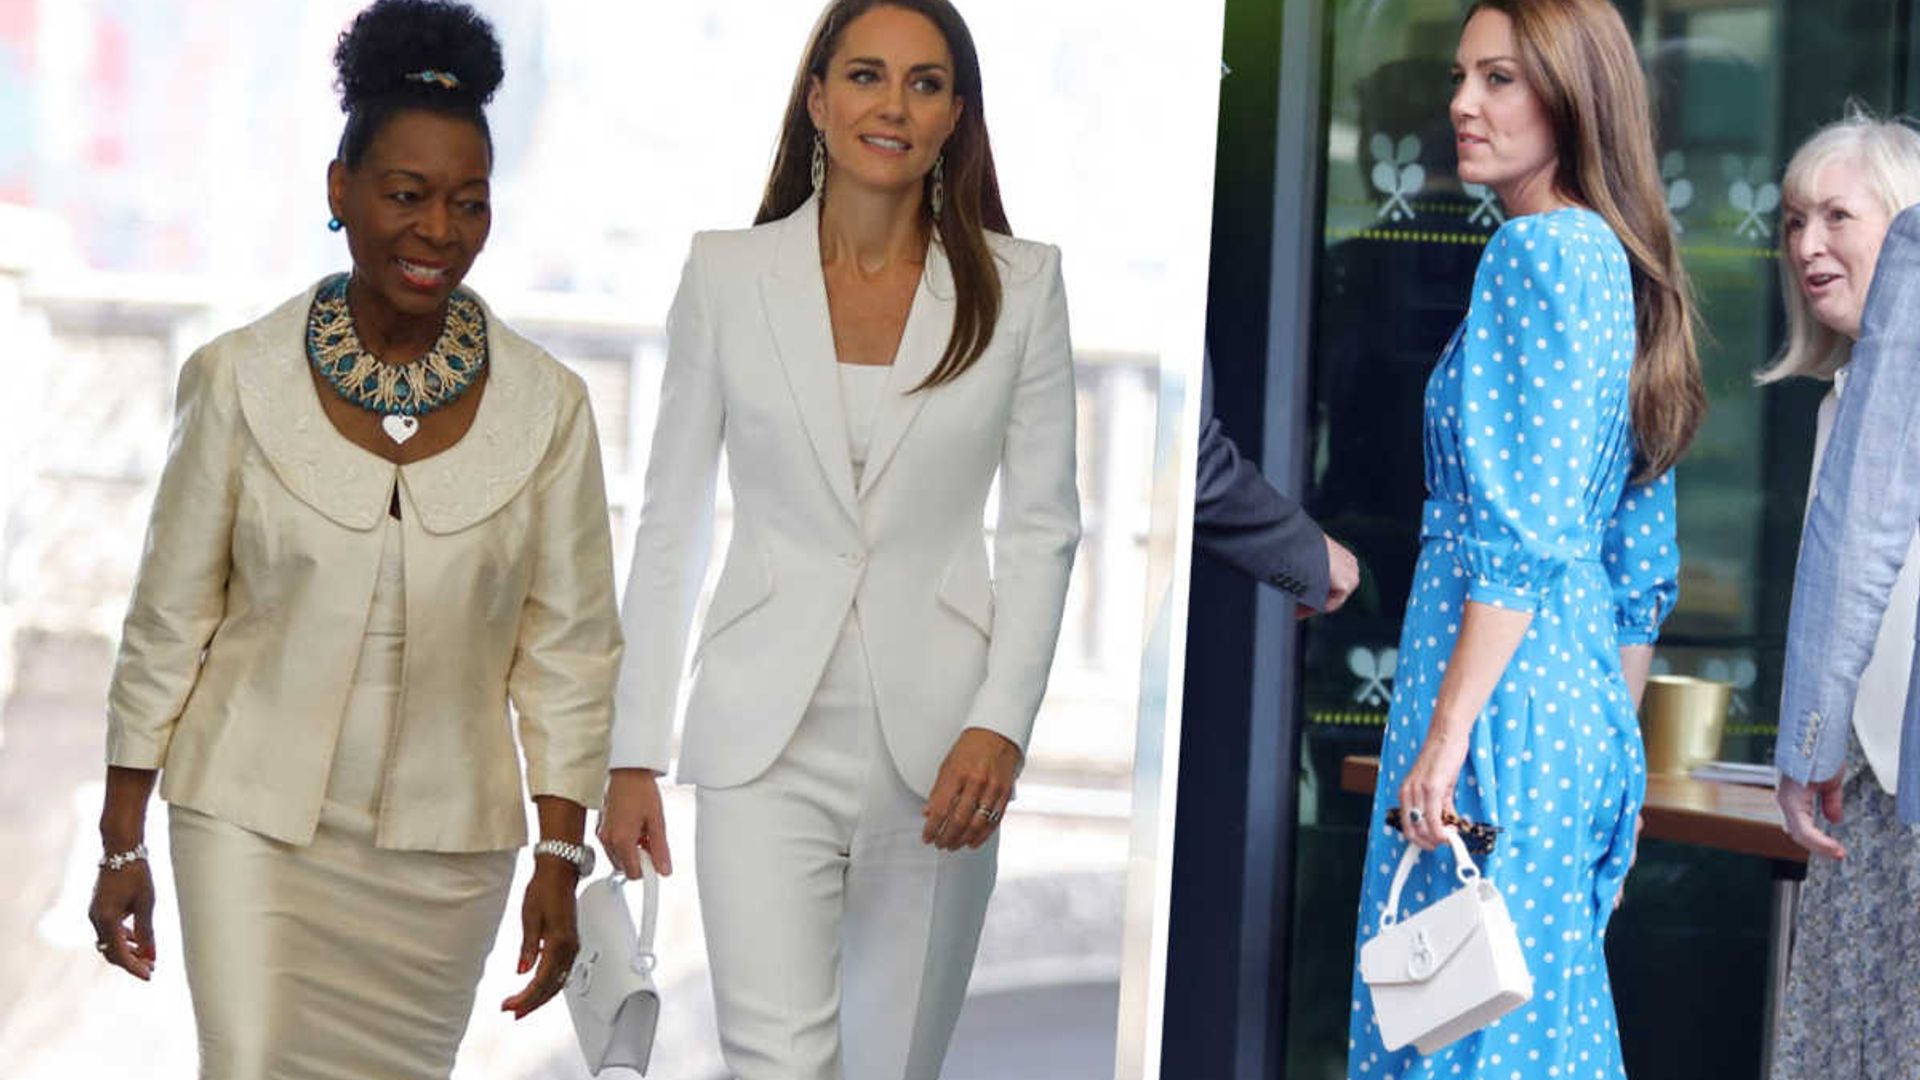 Kate Middleton's Top-Handle Bag Is Fancier Than a Crossbody: Get the Look